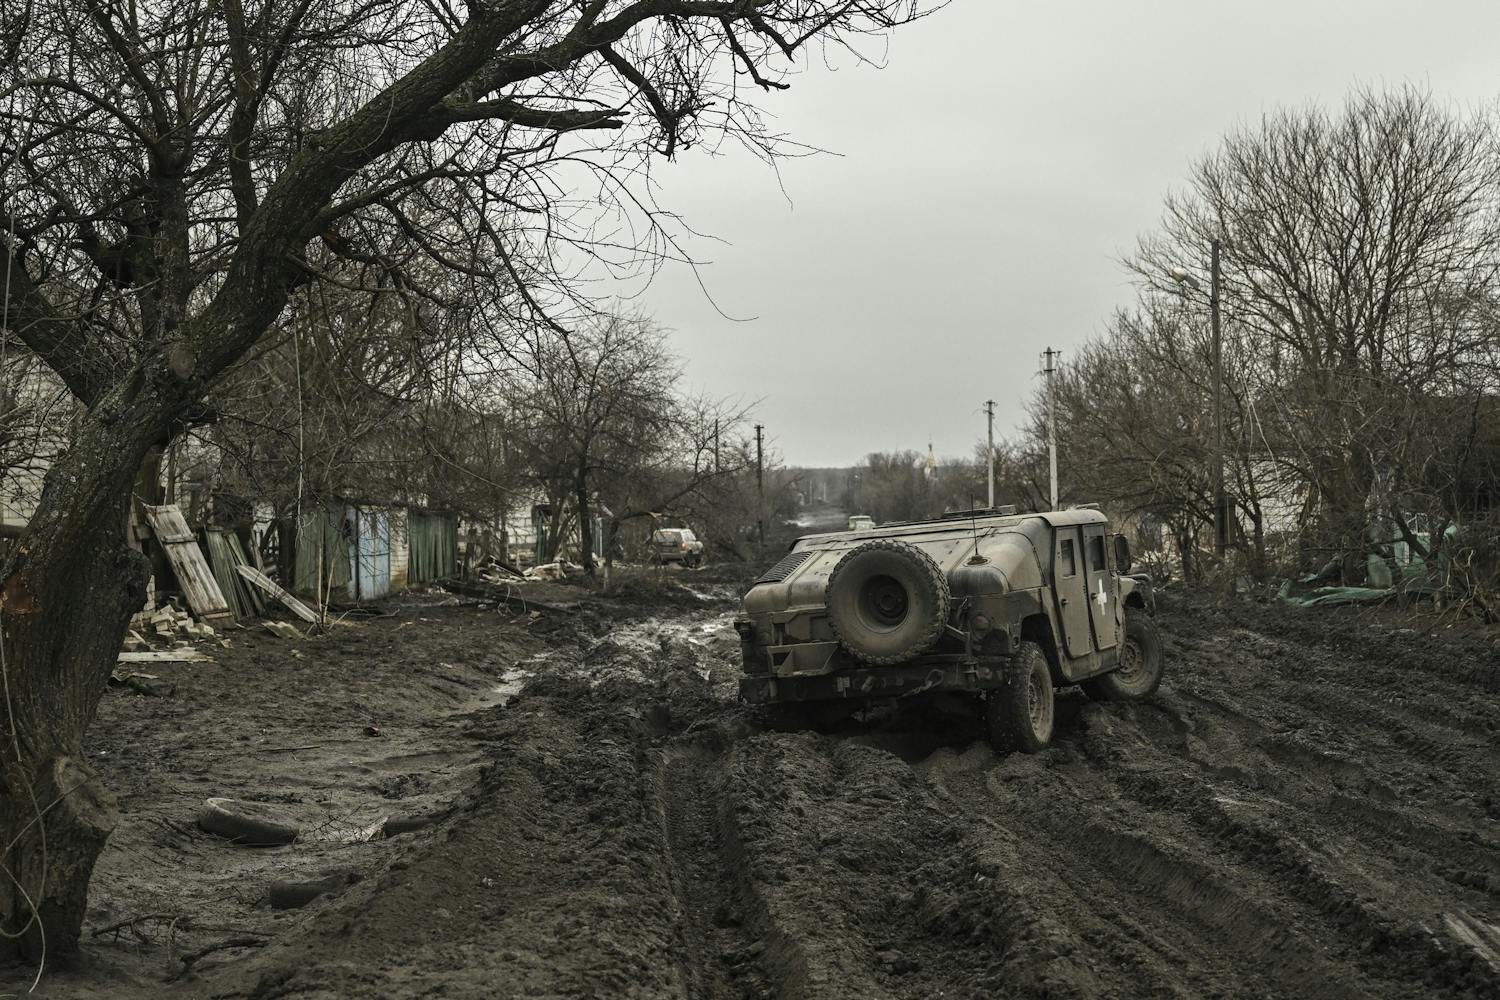 “Ukraine has only 30 days before weather conditions hamper its offensive.”